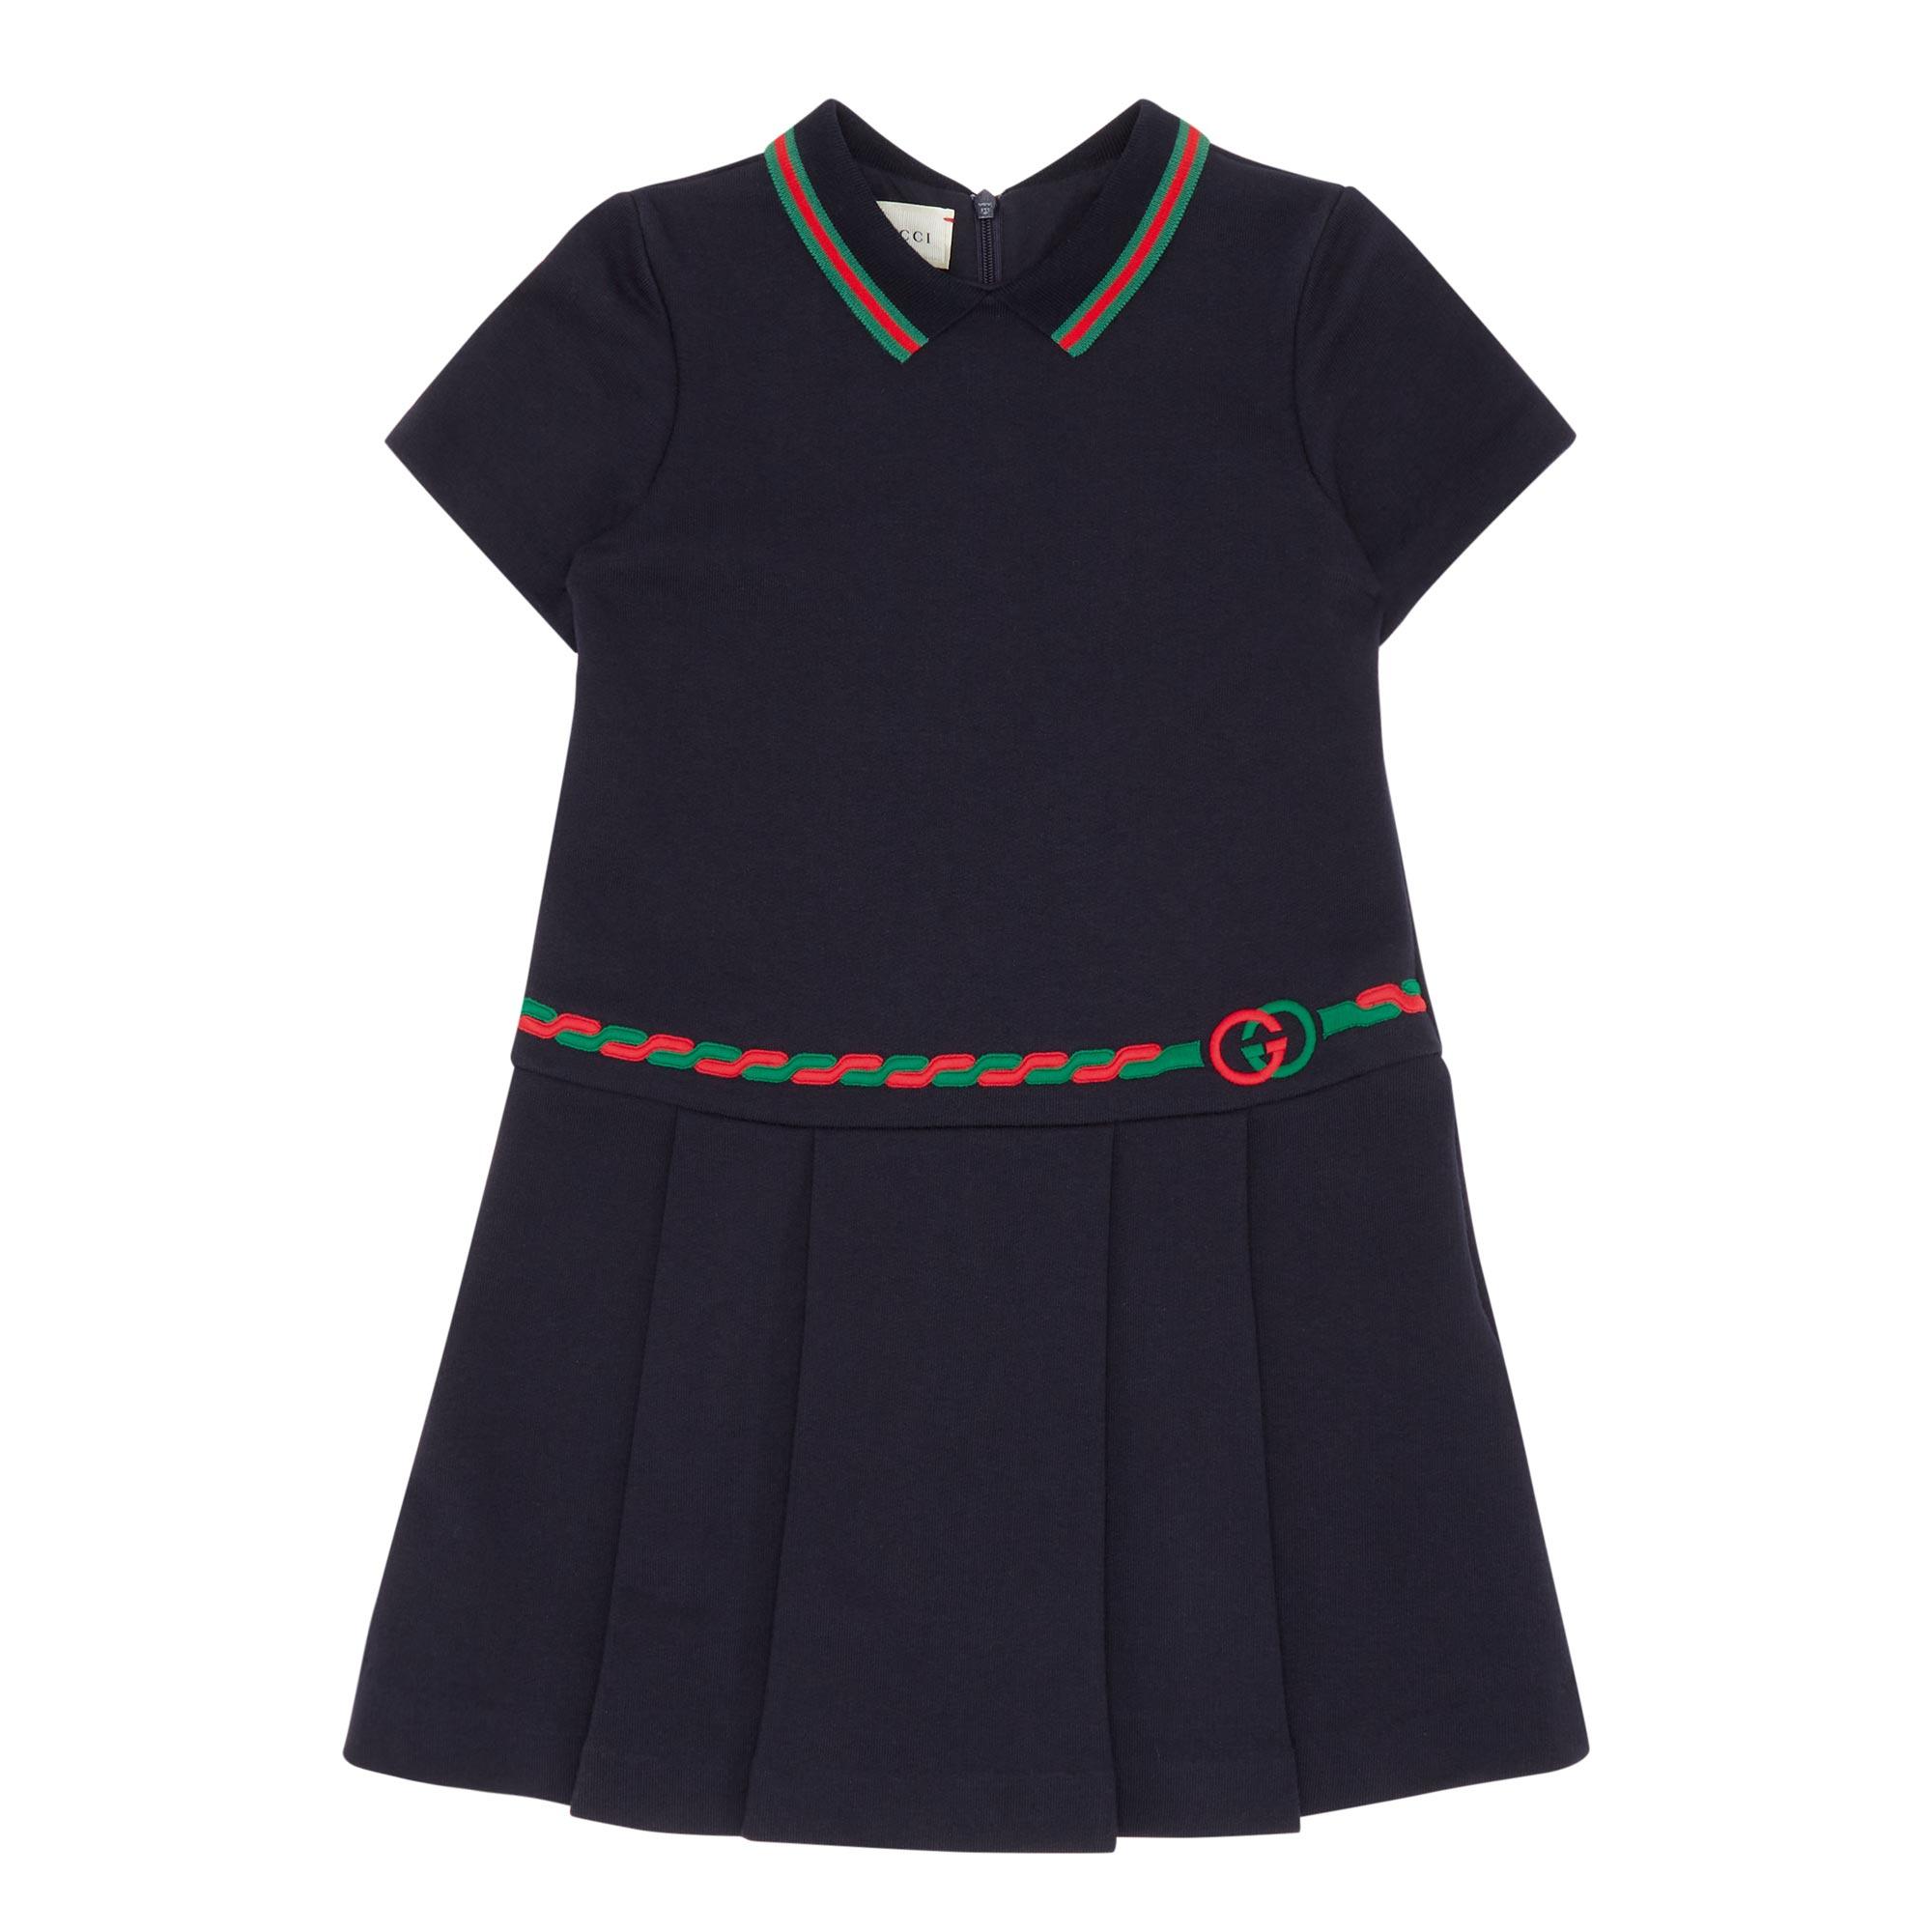 GG Embroidered Cotton Dress